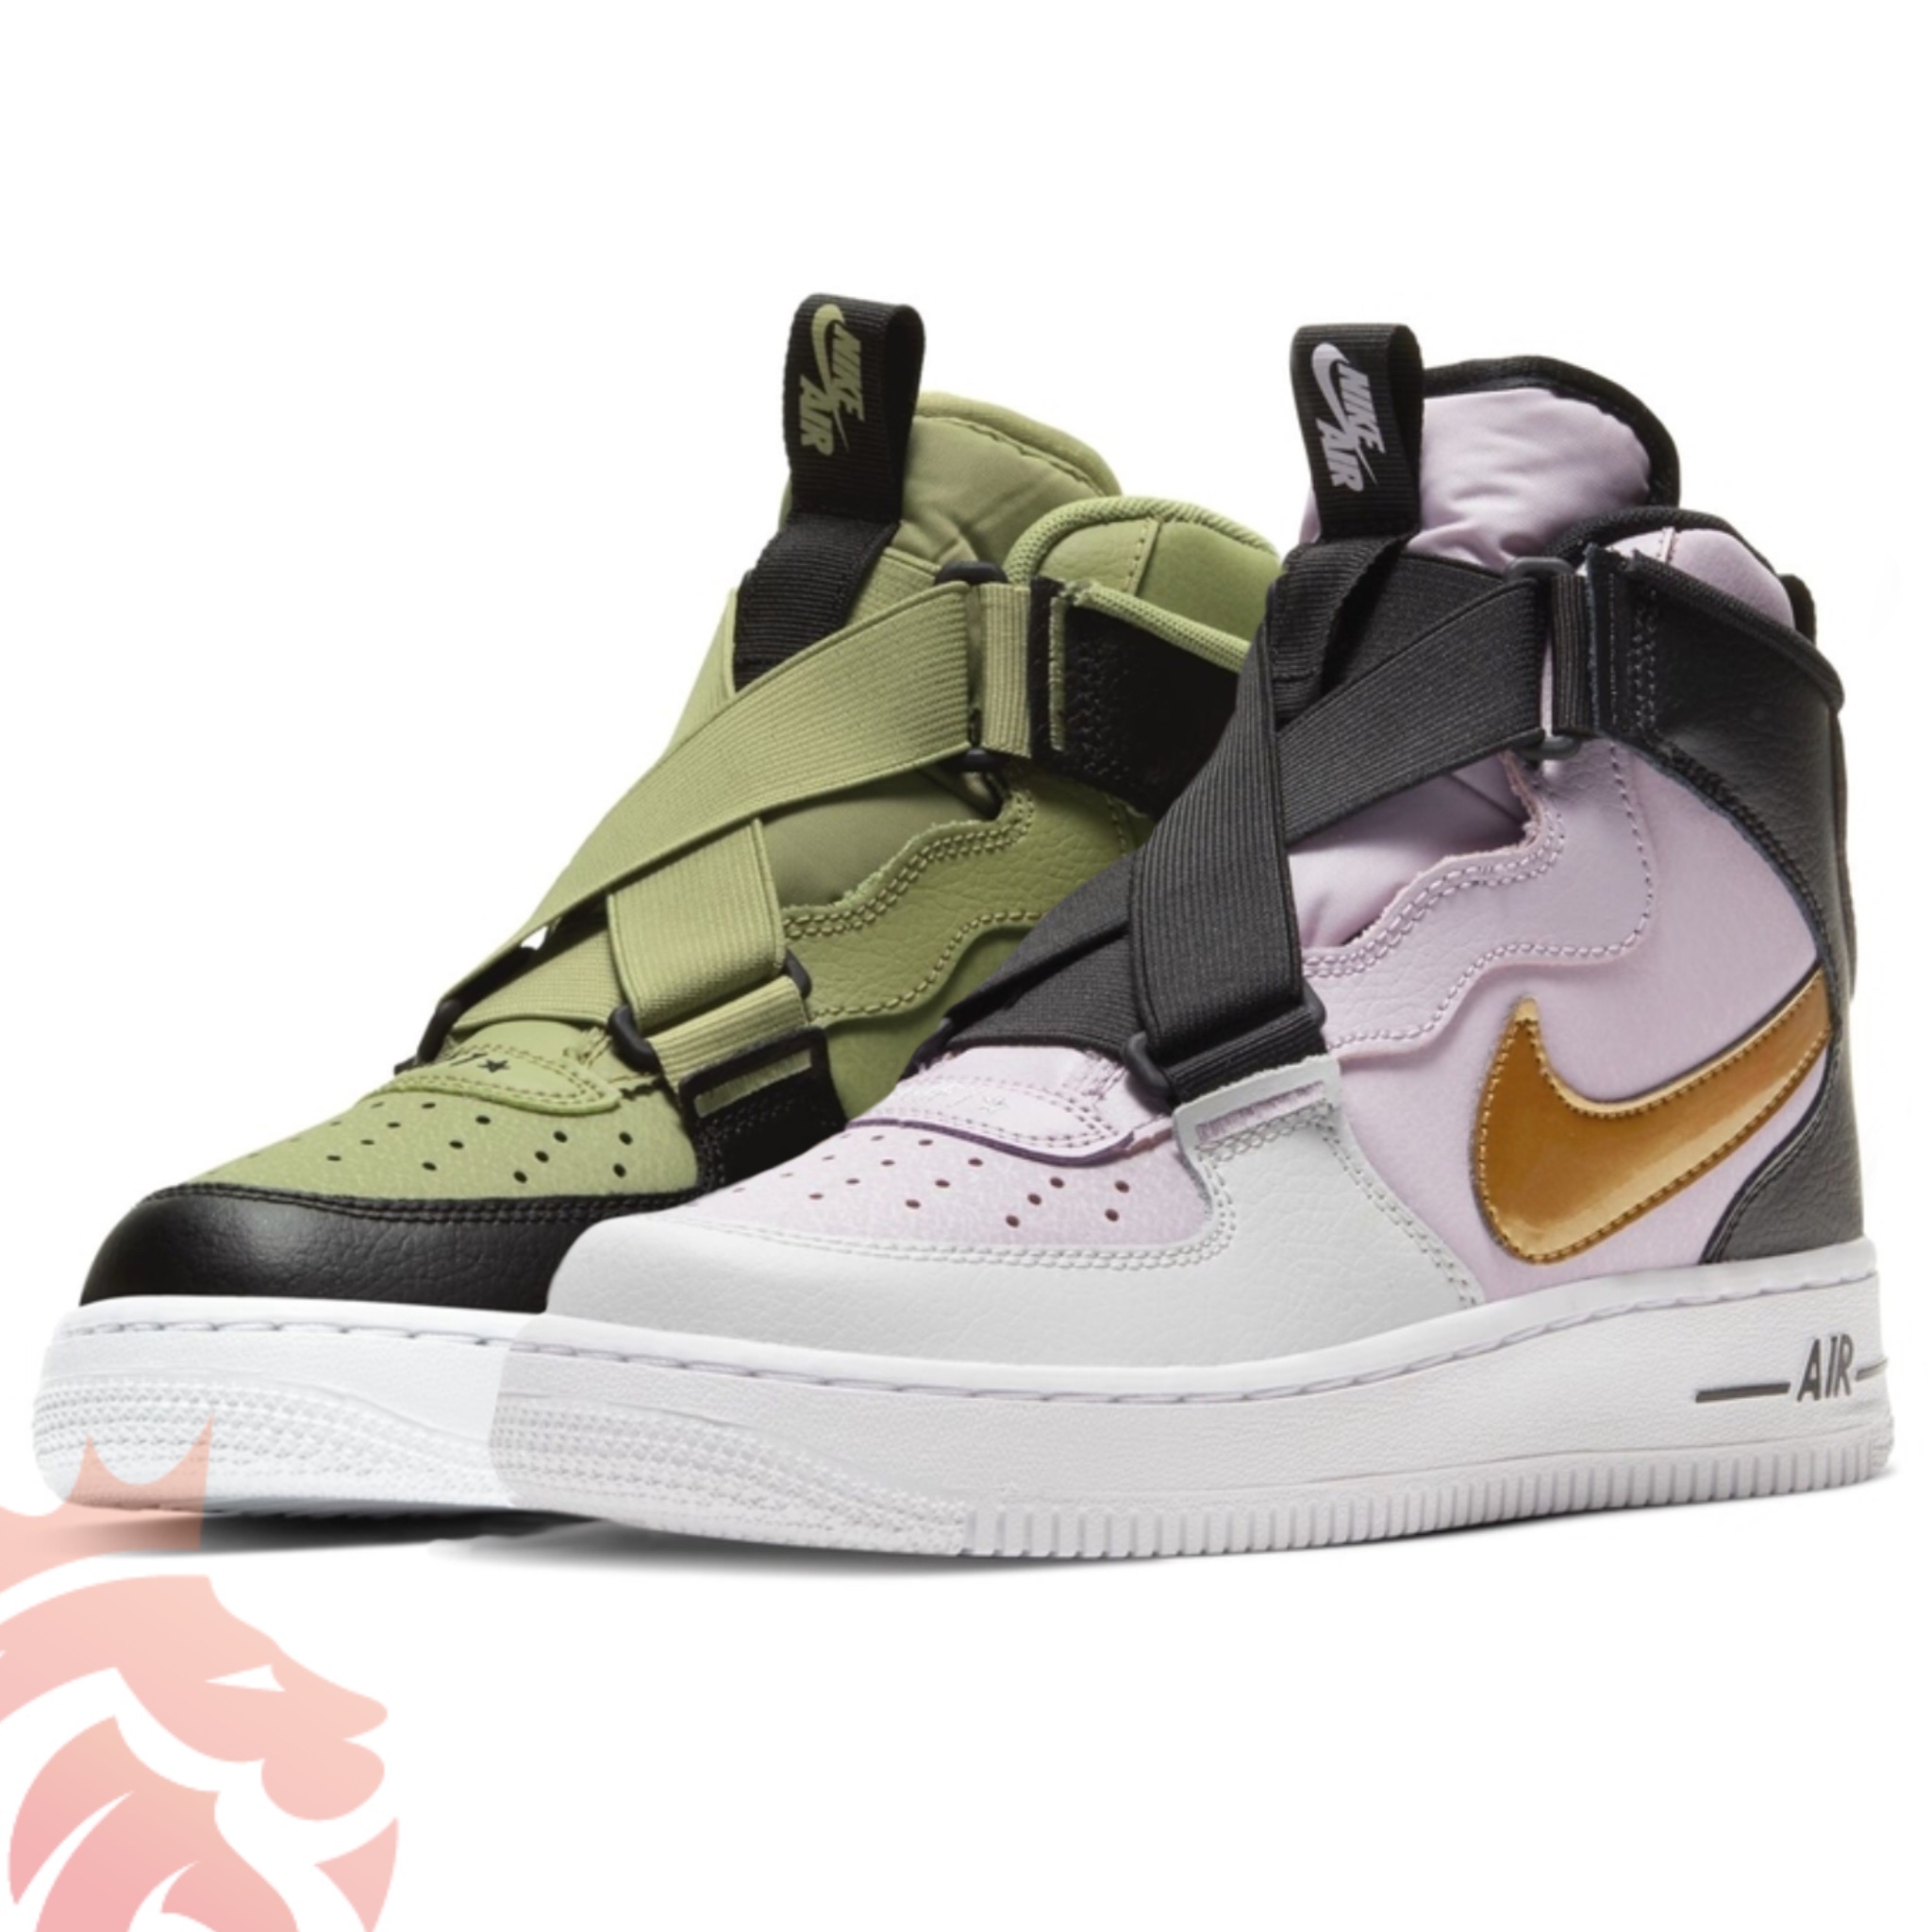 Nike Air Force 1 Highness "Dust Olive" & "Iced Lilac" For Older Kids